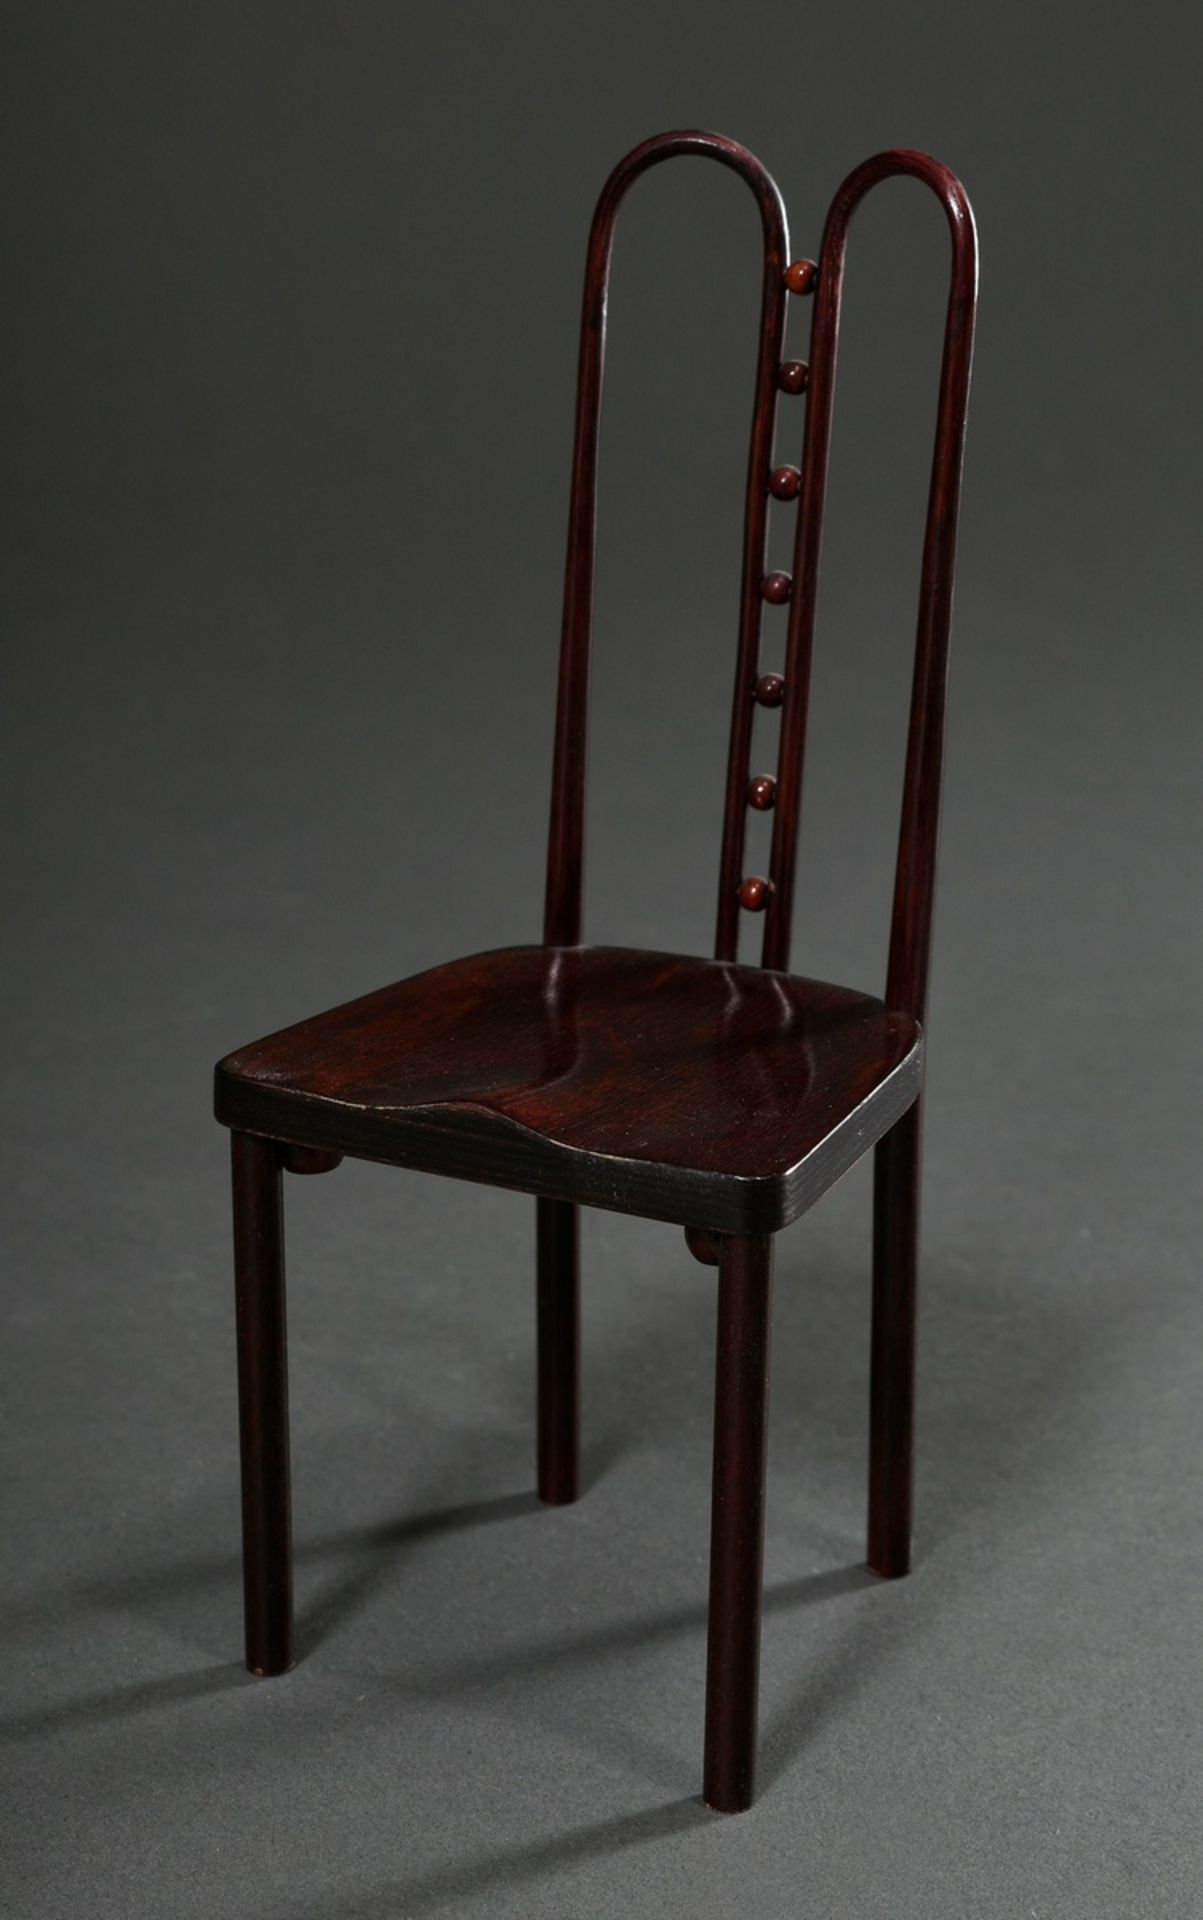 Miniature model chair "No. 371", design: Josef Hofmann, 1905-1907, beech wood stained in mahogany,  - Image 2 of 4